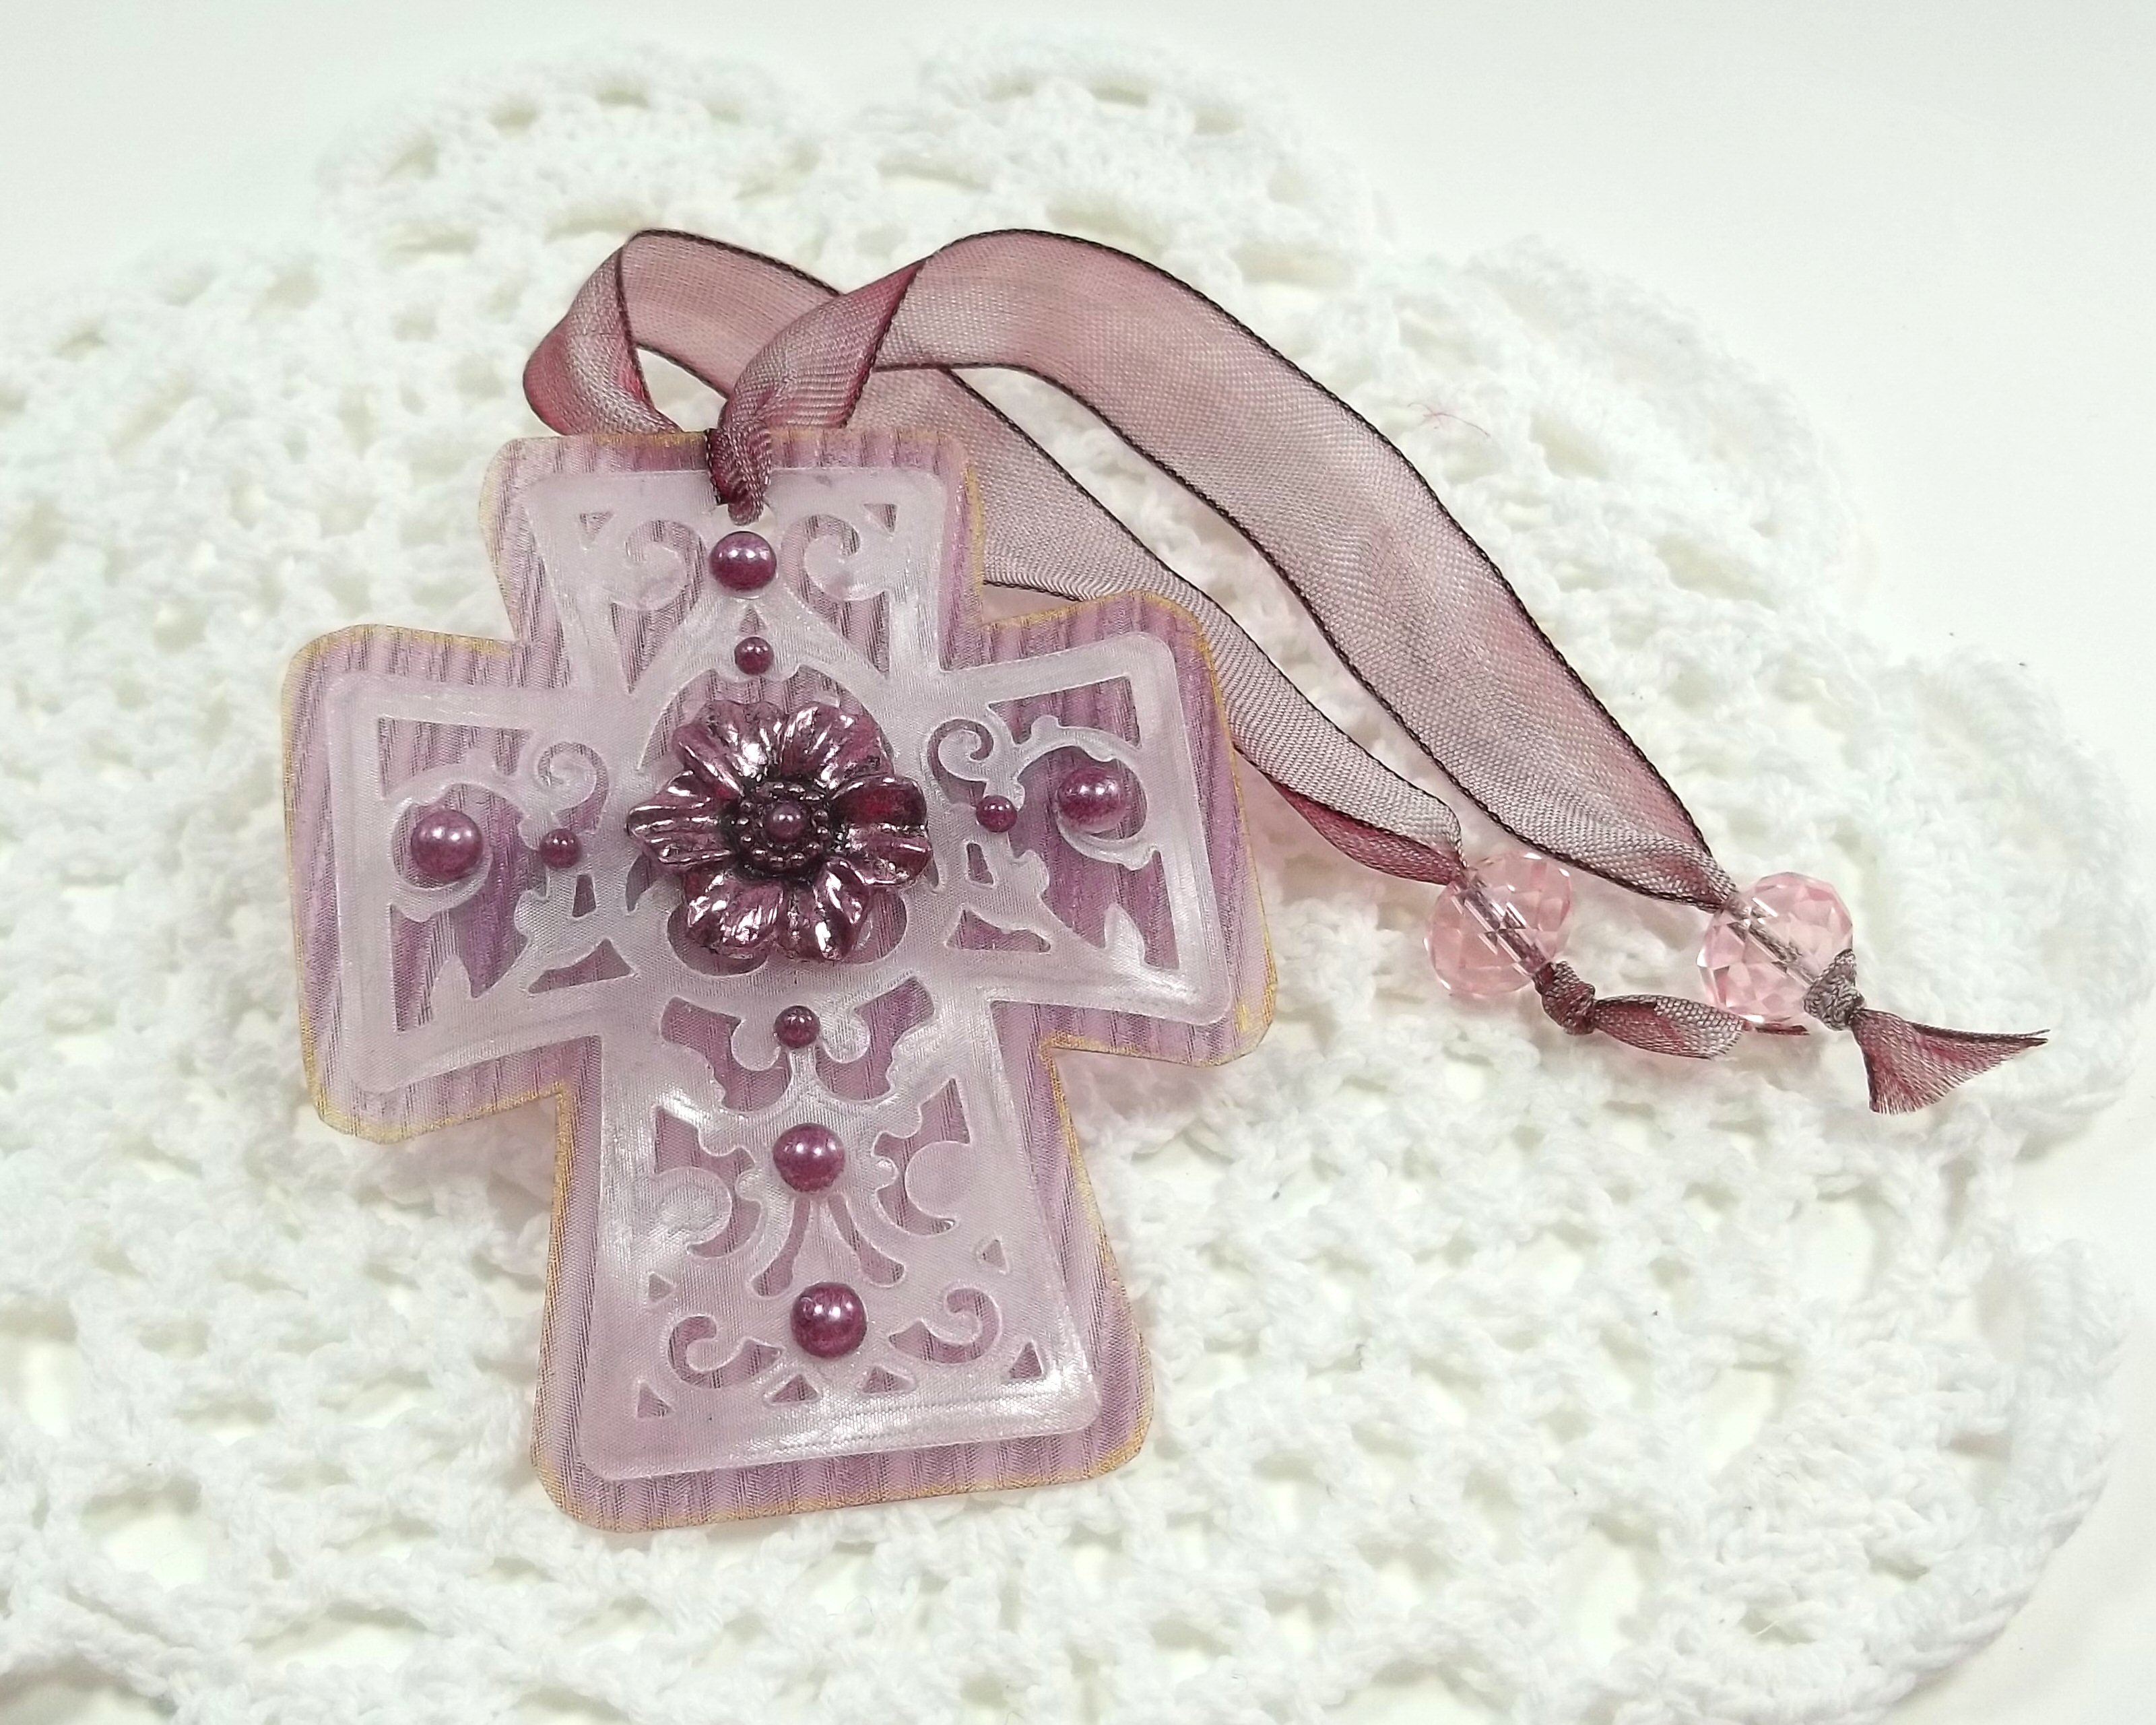 Bookmark Crafting Project - Christian Cross